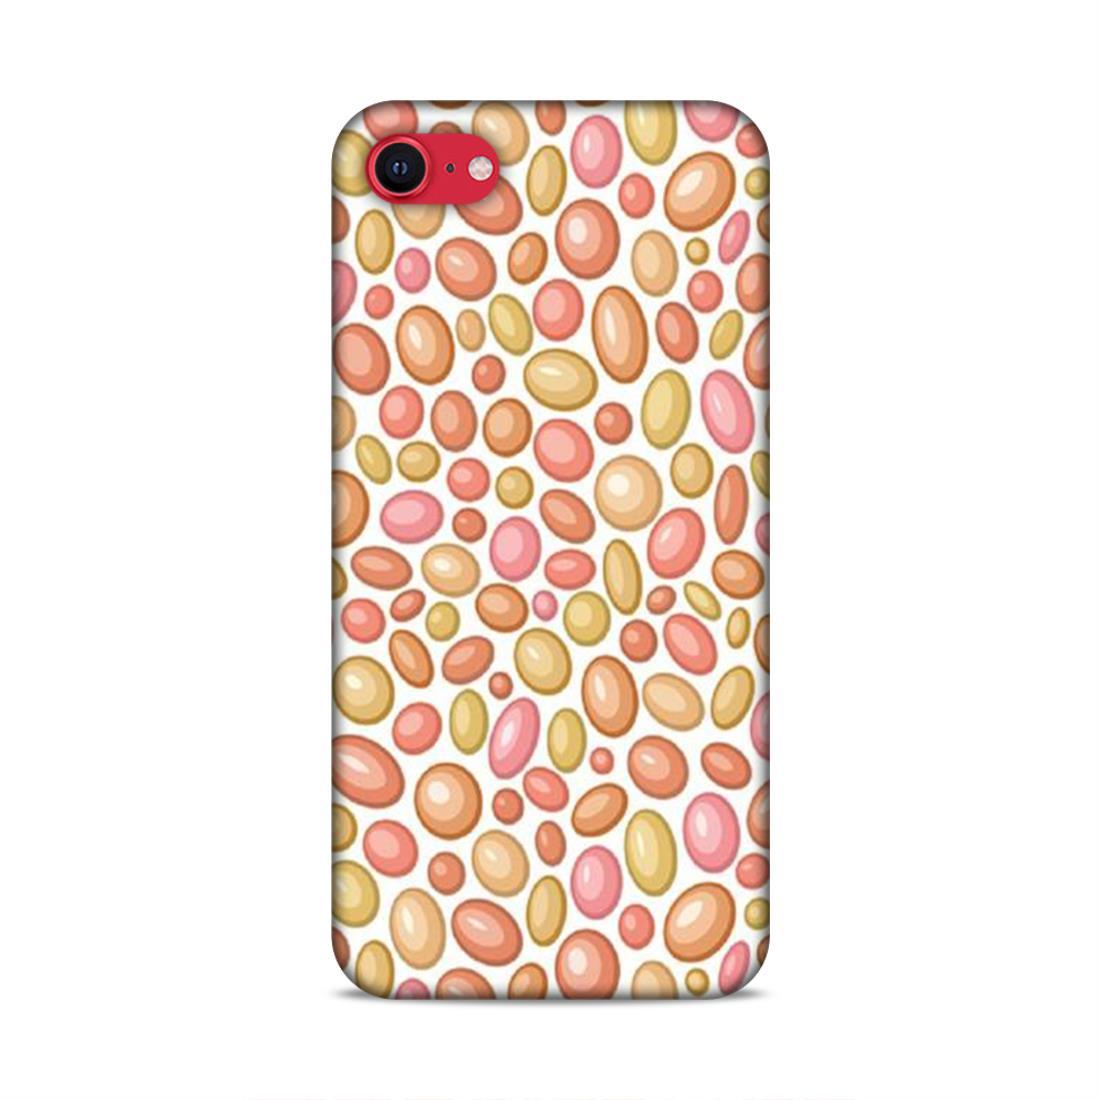 Fancy New Pattern iPhone SE 2020 Phone Case Cover